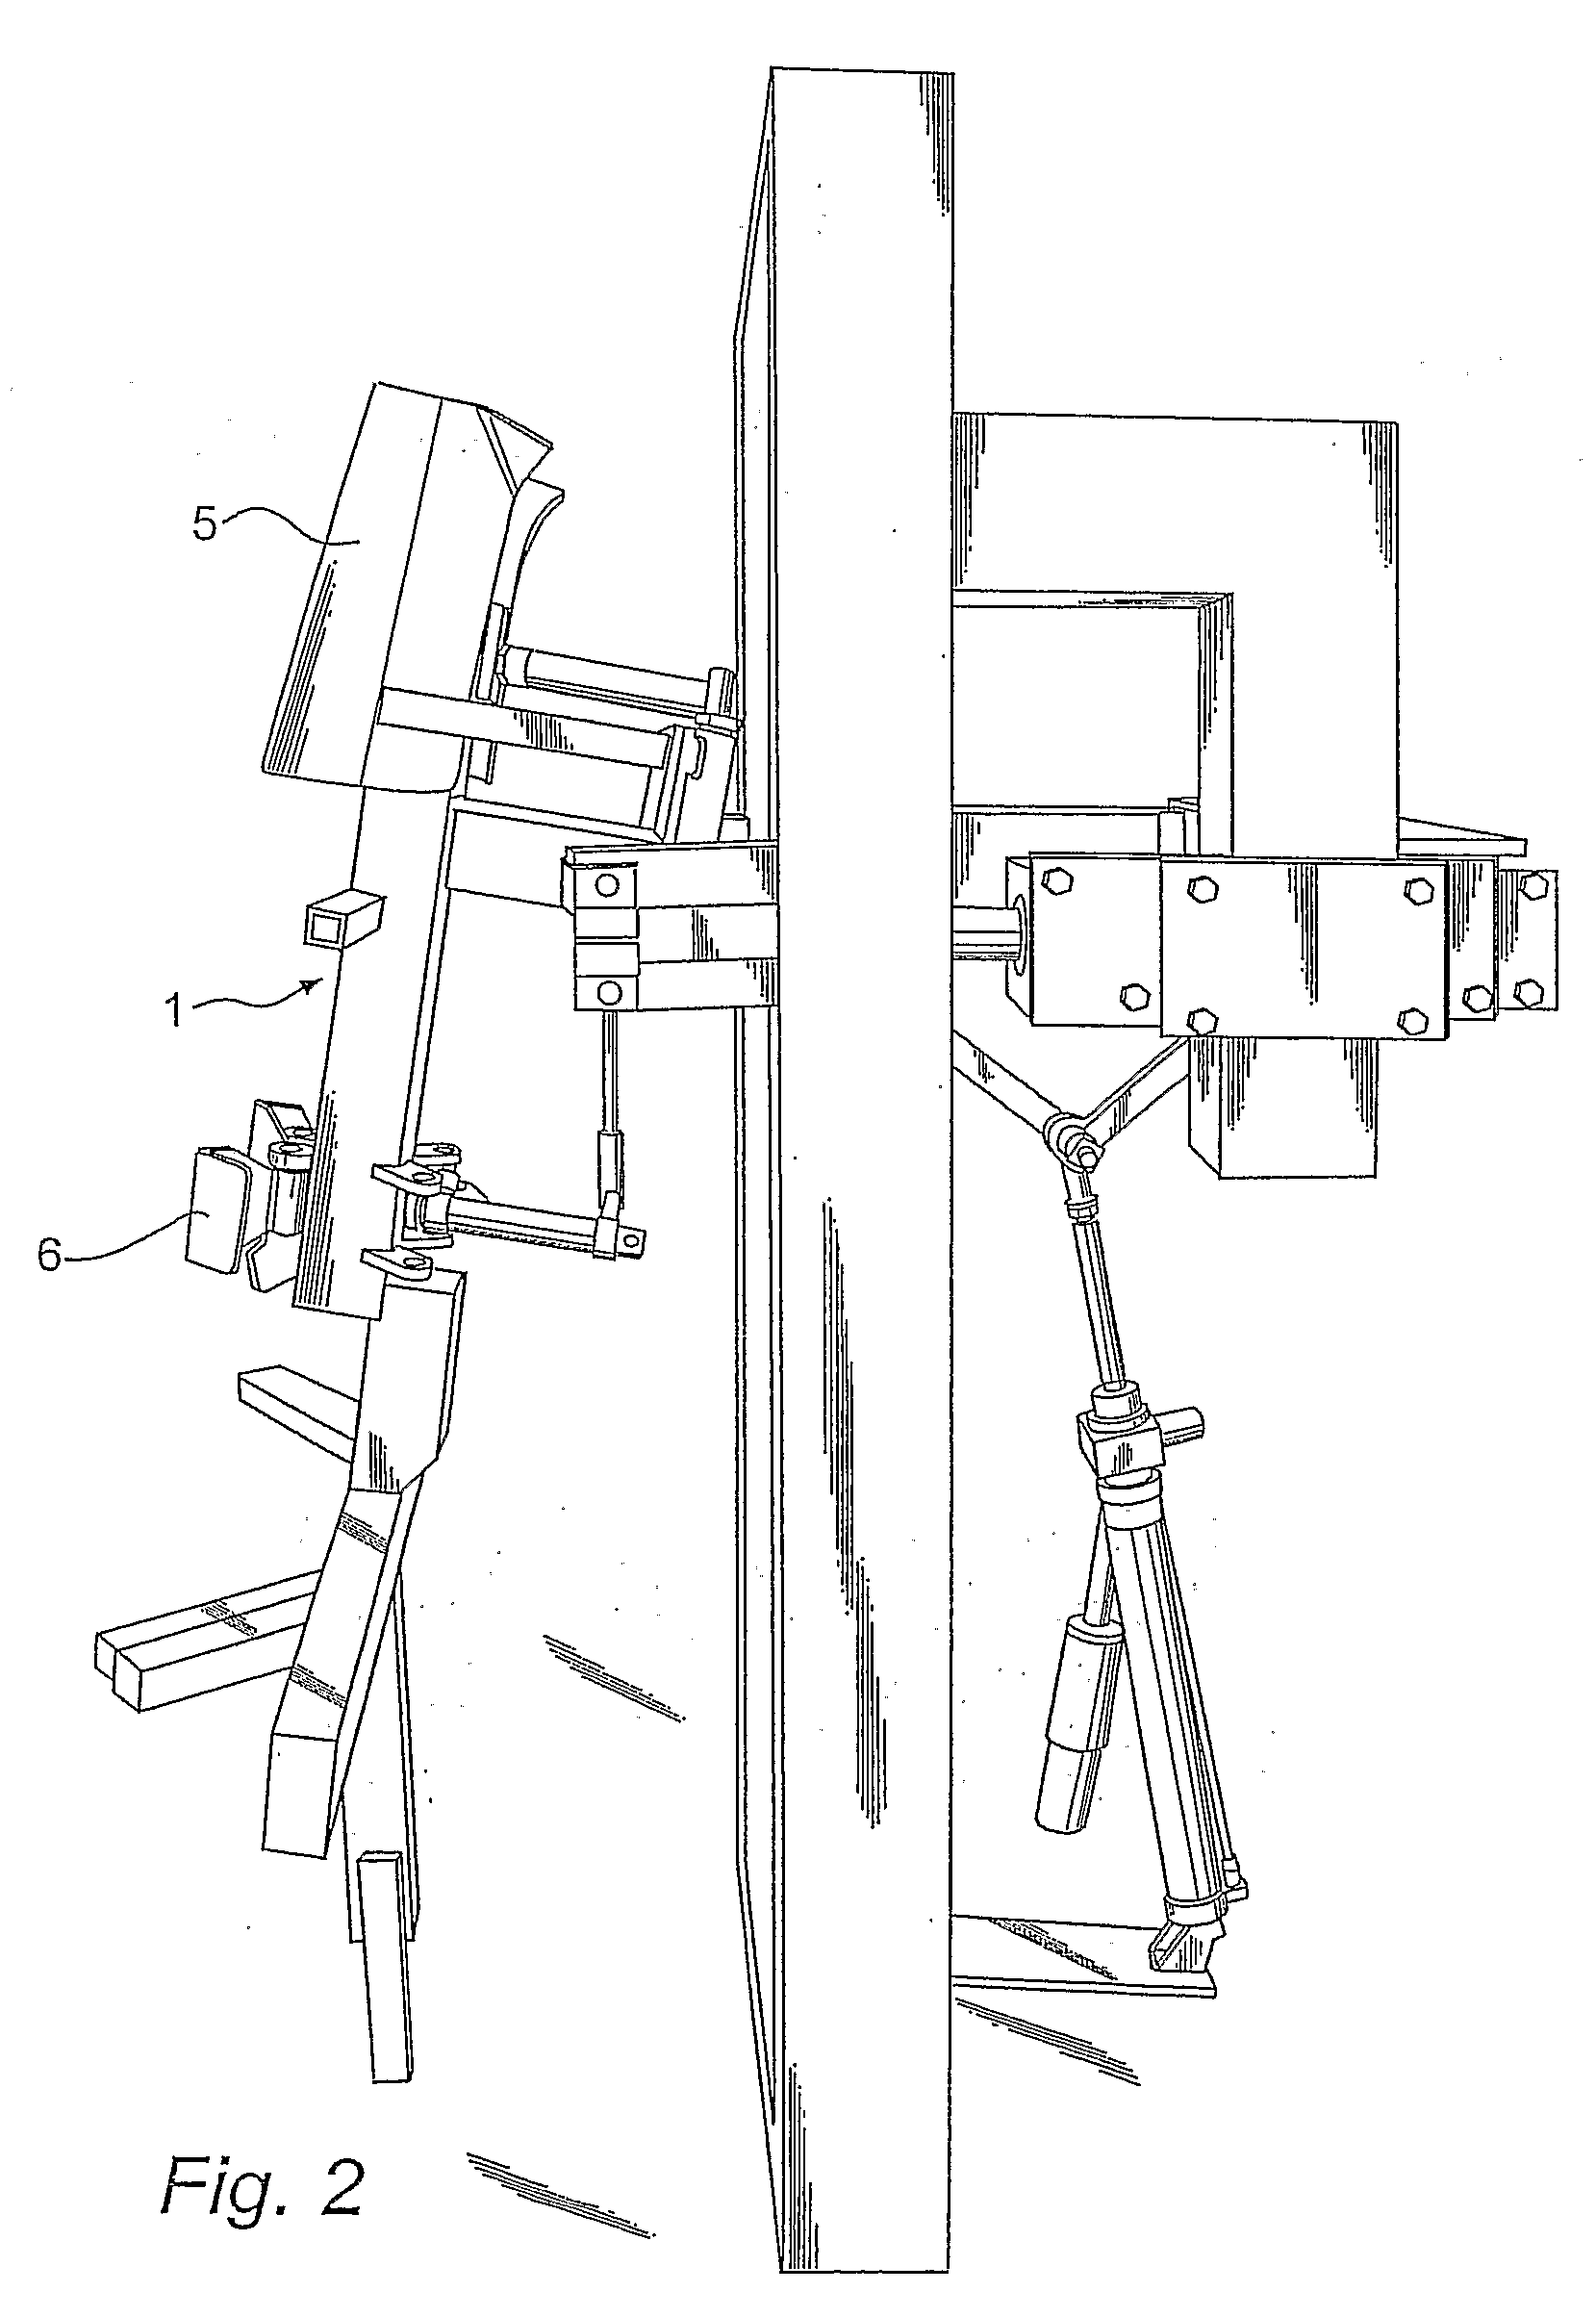 Apparatus and Method for Cutting-Free of Tender-Loin